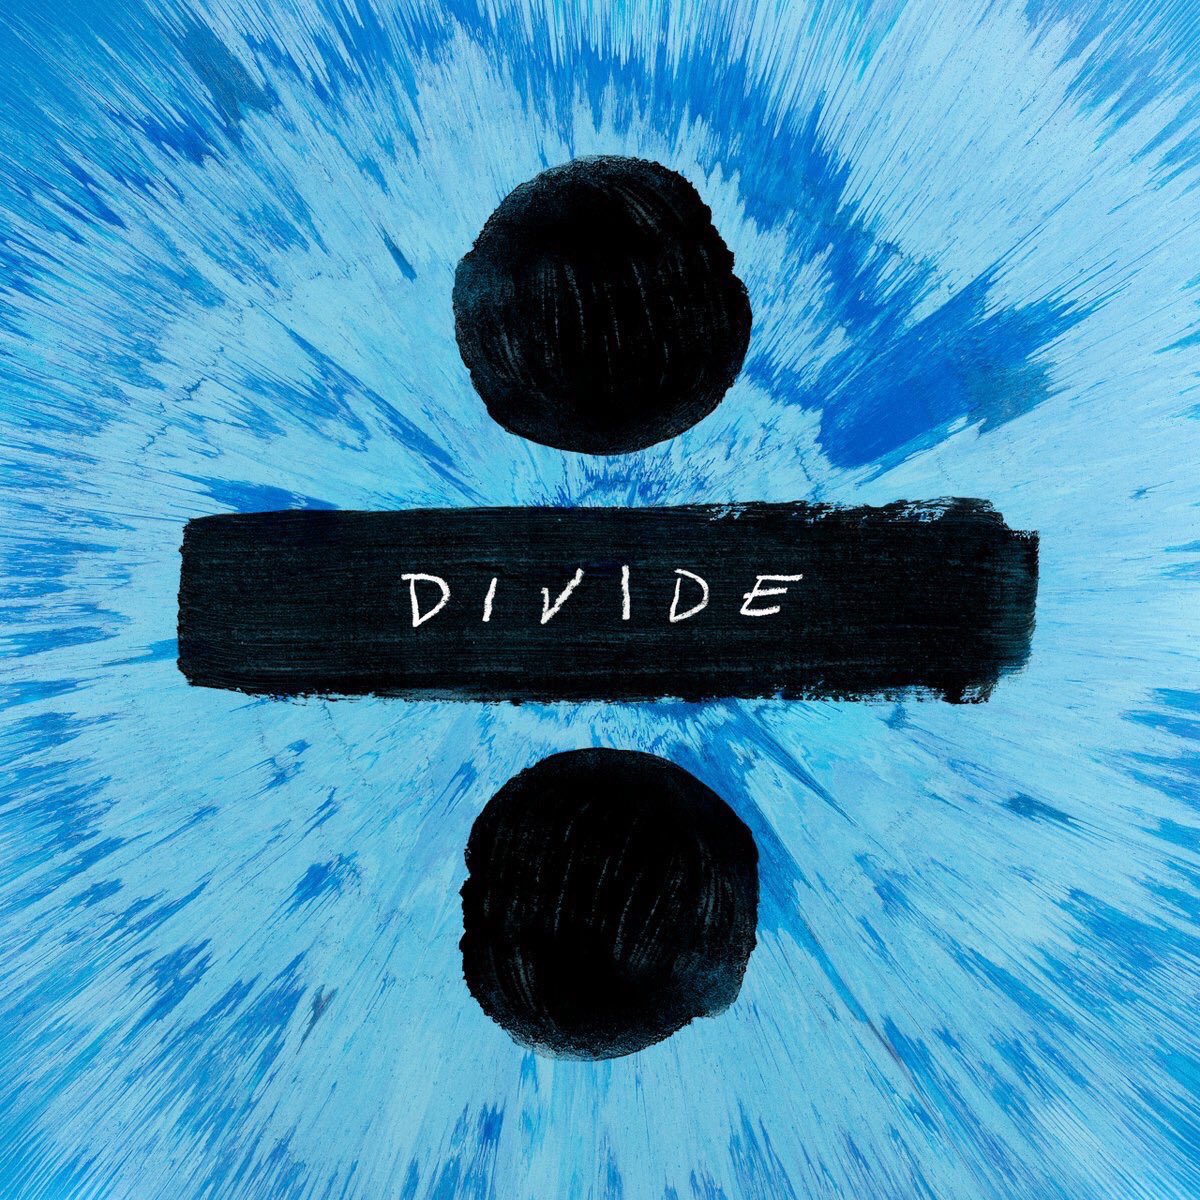 2017: Ed Sheeran'Divide' became Ed's most successful era with hits 'Shape Of You' (the most heard song on radio in 2017) & 'Perfect'. The tour sold the most tickets in history.Billboard credits Sheeran for redefining the single release method for dropping two singles at once.